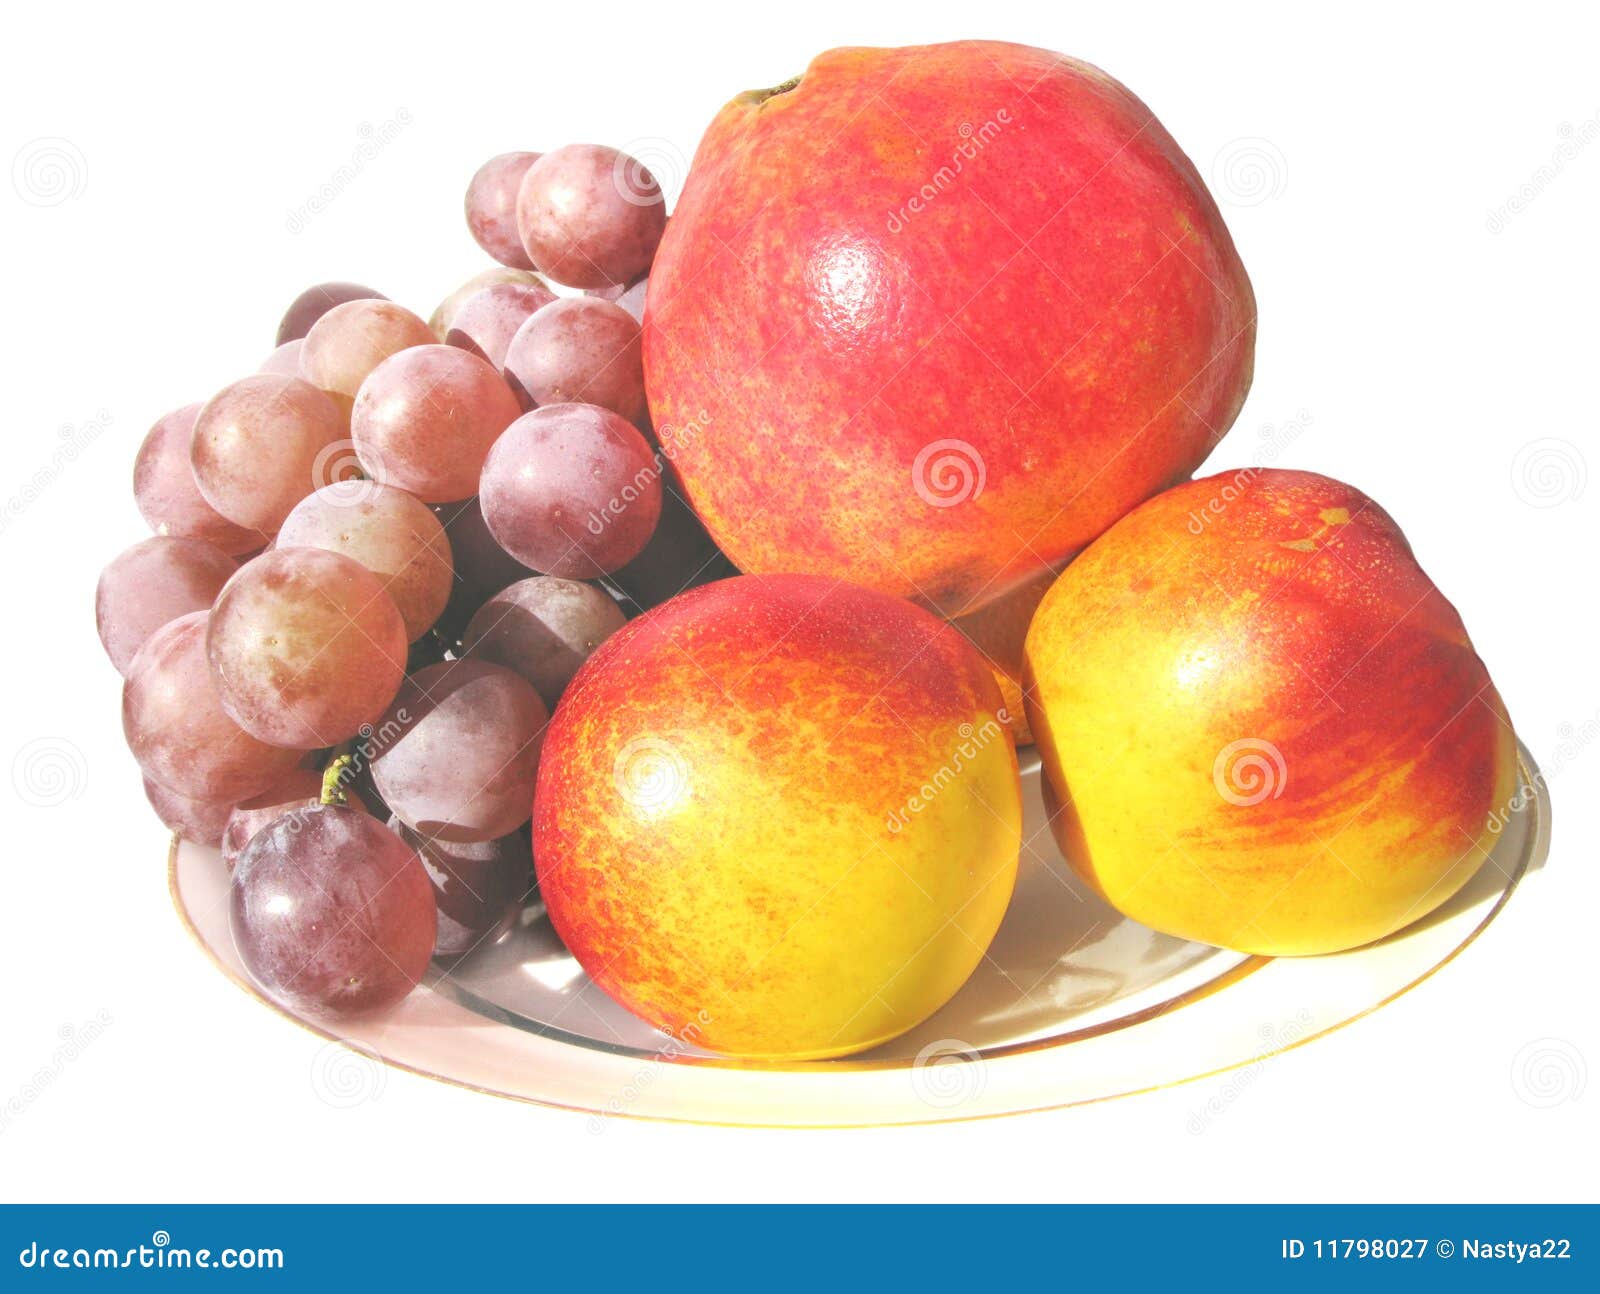 clipart of different fruits - photo #50